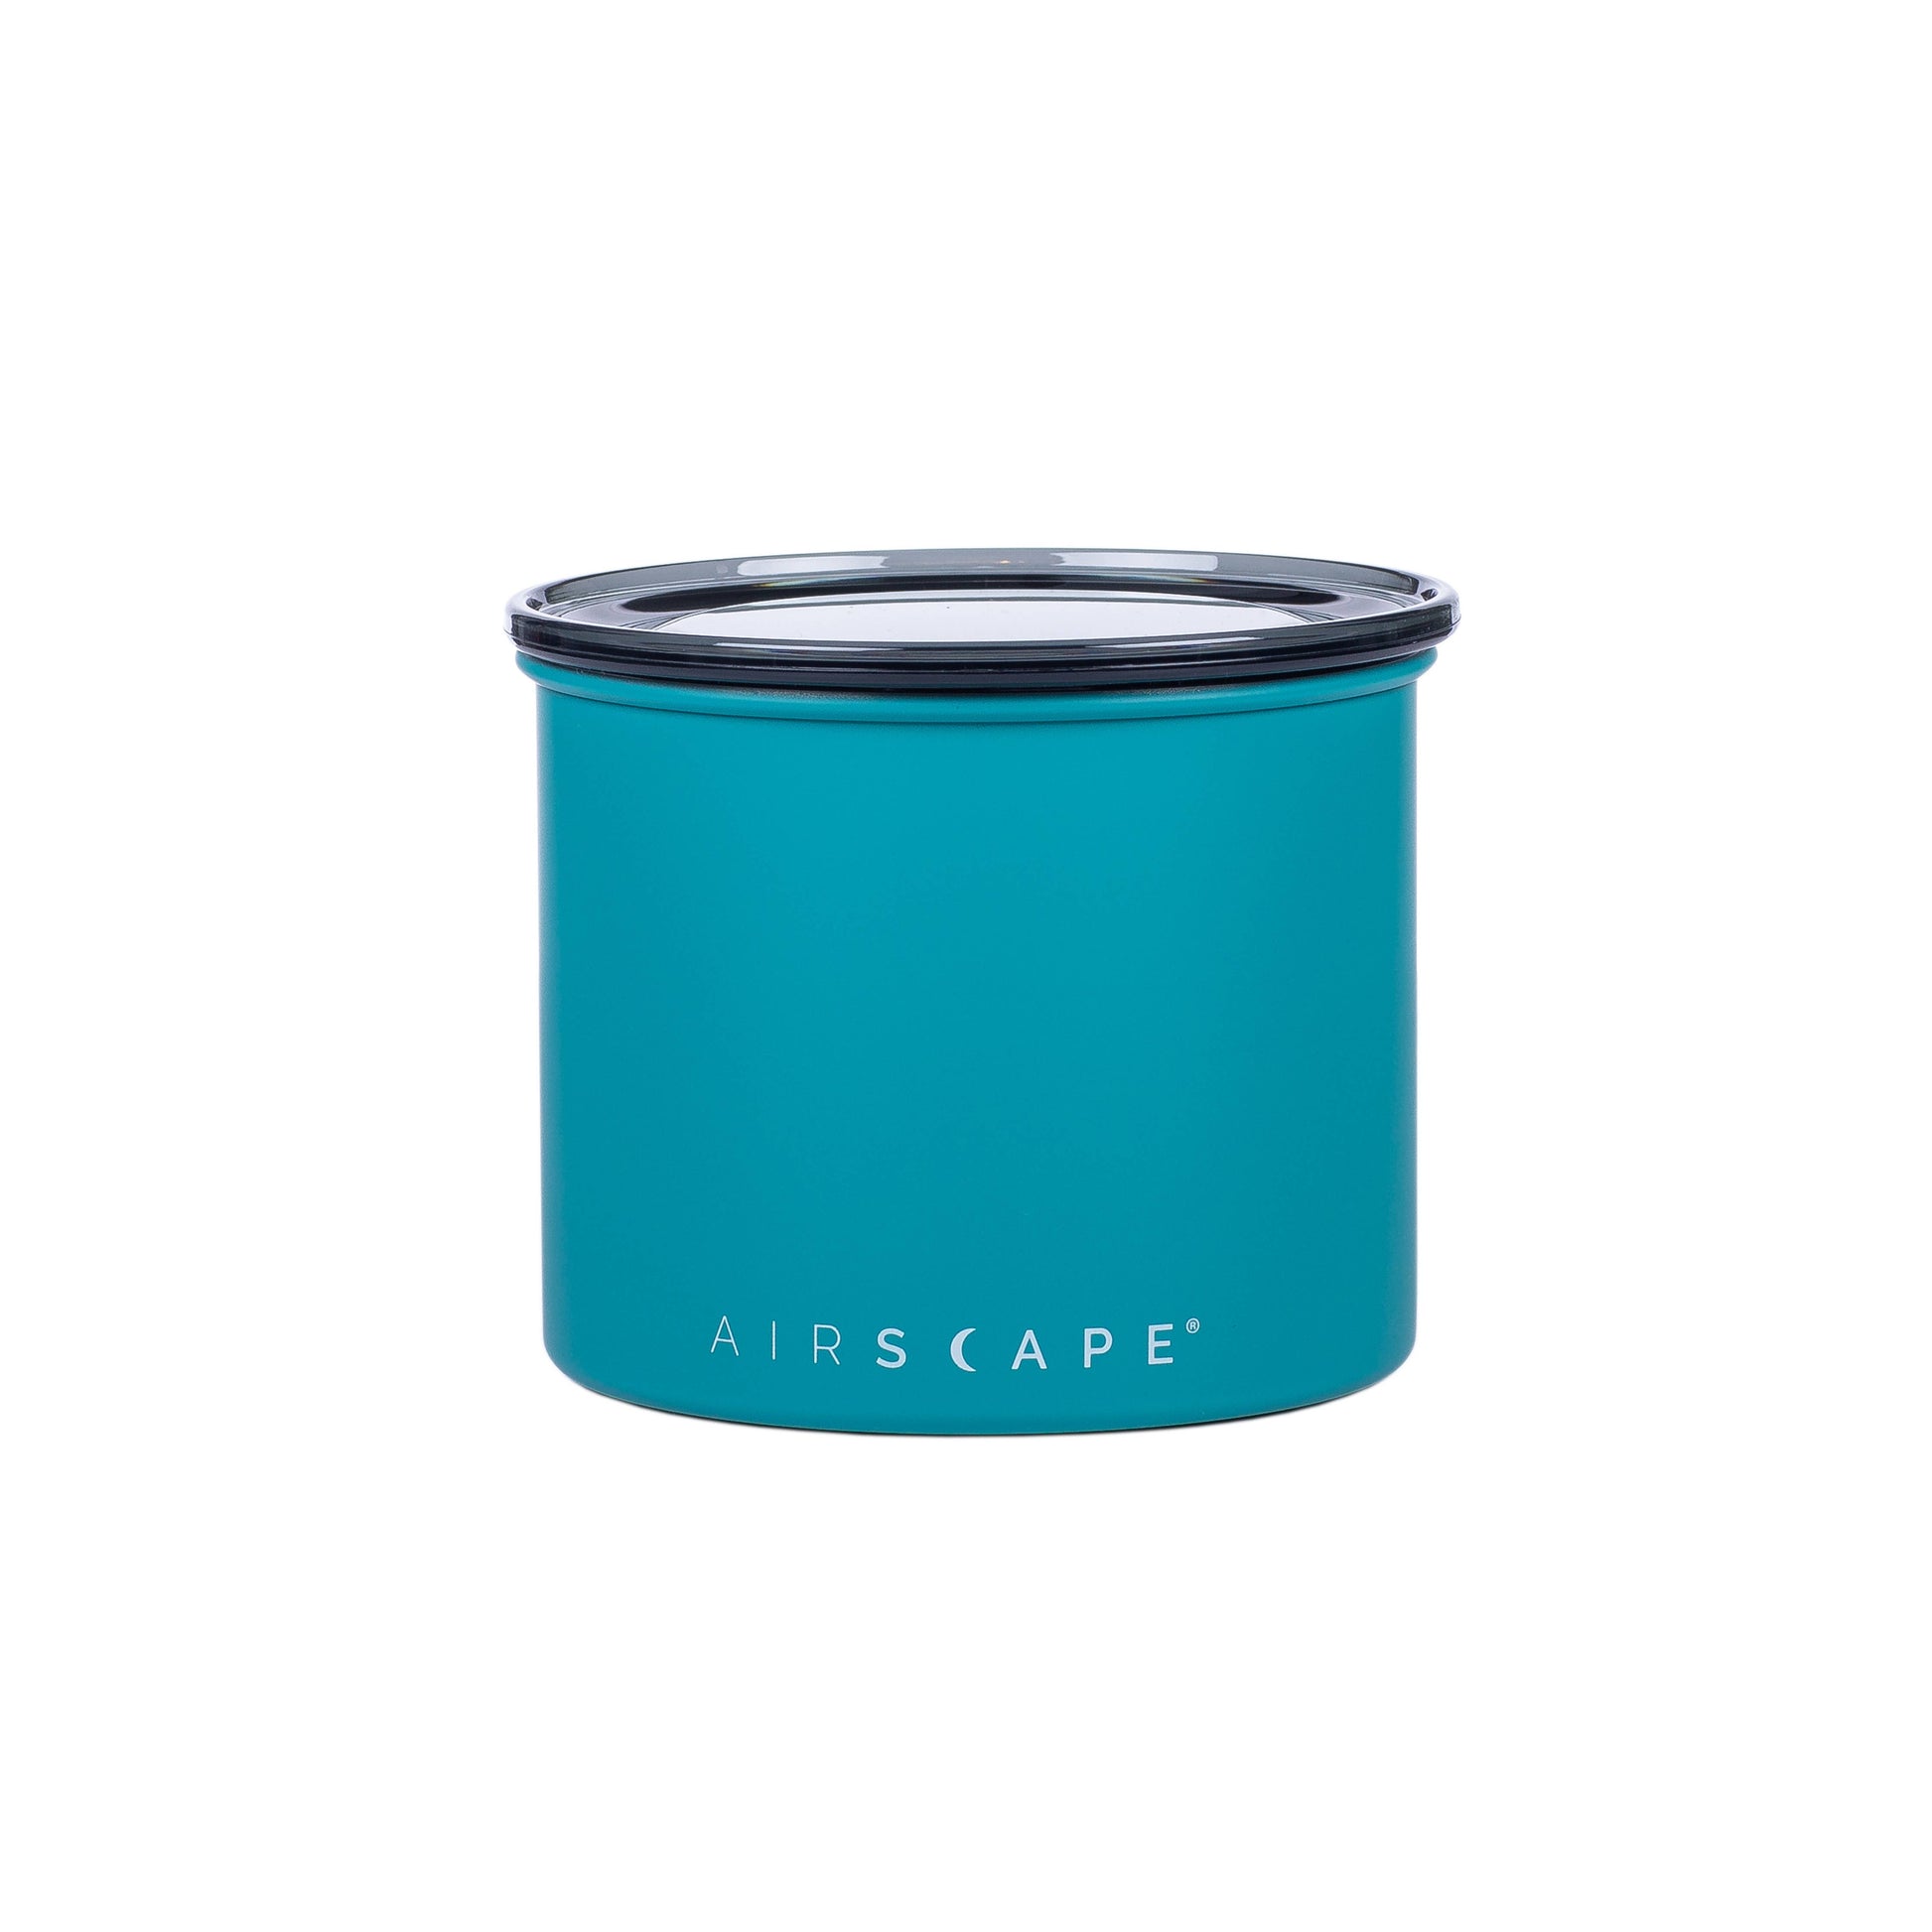 Planetary Design - Airscape Classic Stainless Steel Canister - Coffee Coaching Club